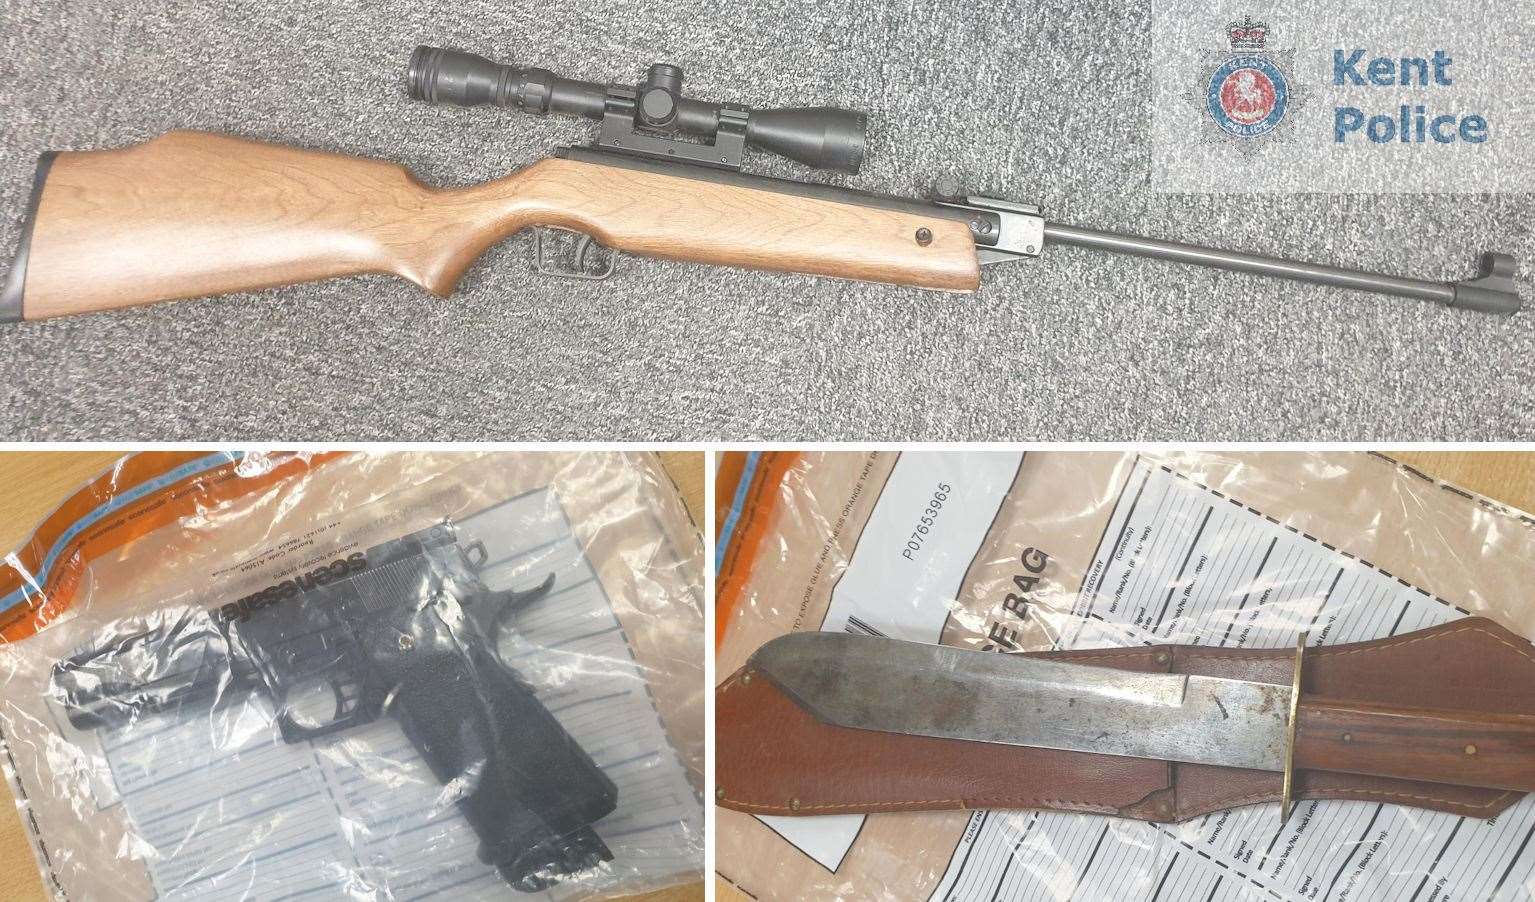 An imitation handgun, air rifle and machete was seized from the Isle of Sheppey. Picture: Kent Police